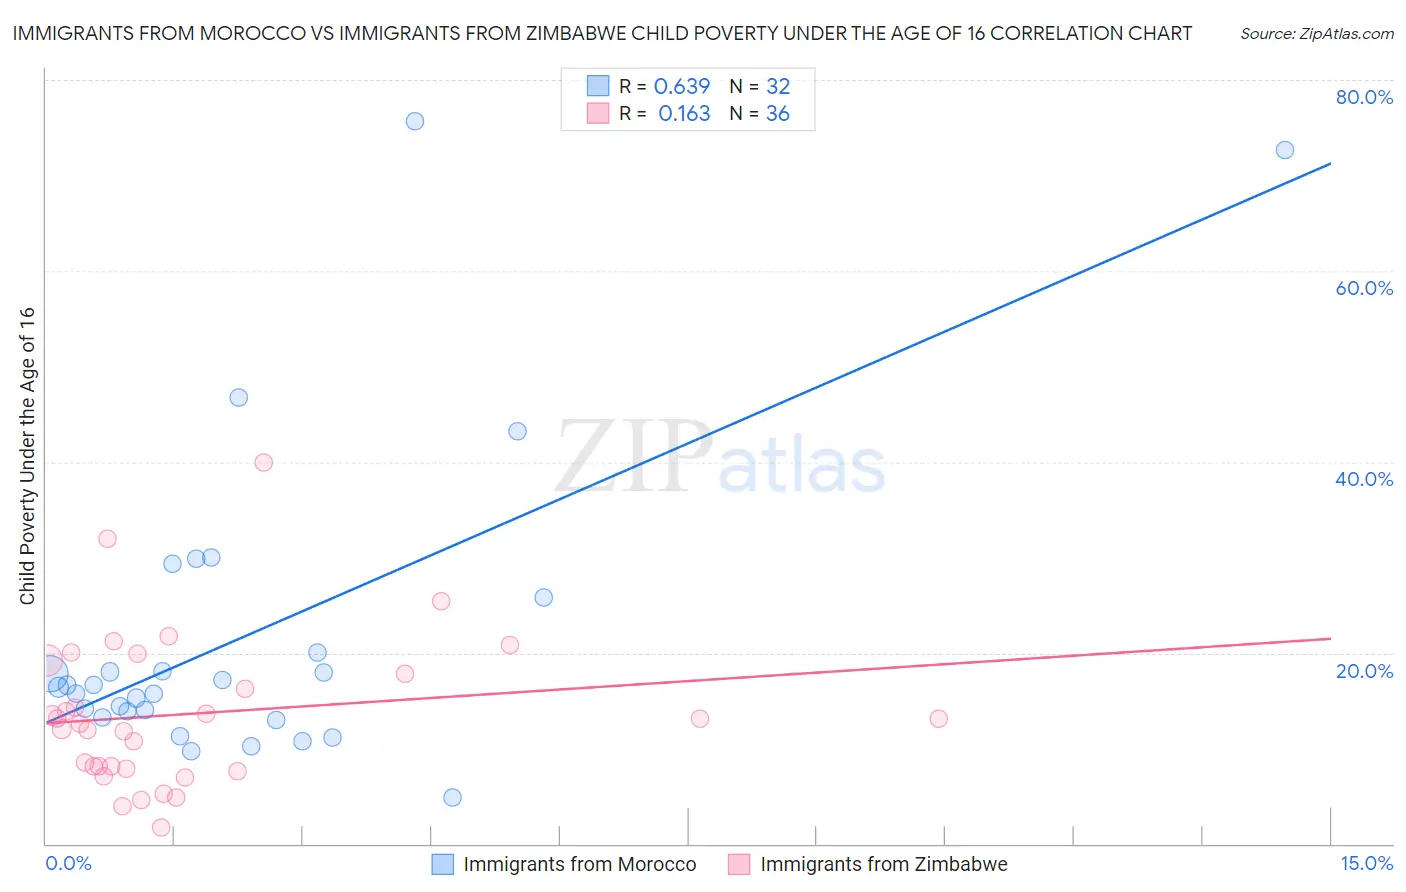 Immigrants from Morocco vs Immigrants from Zimbabwe Child Poverty Under the Age of 16